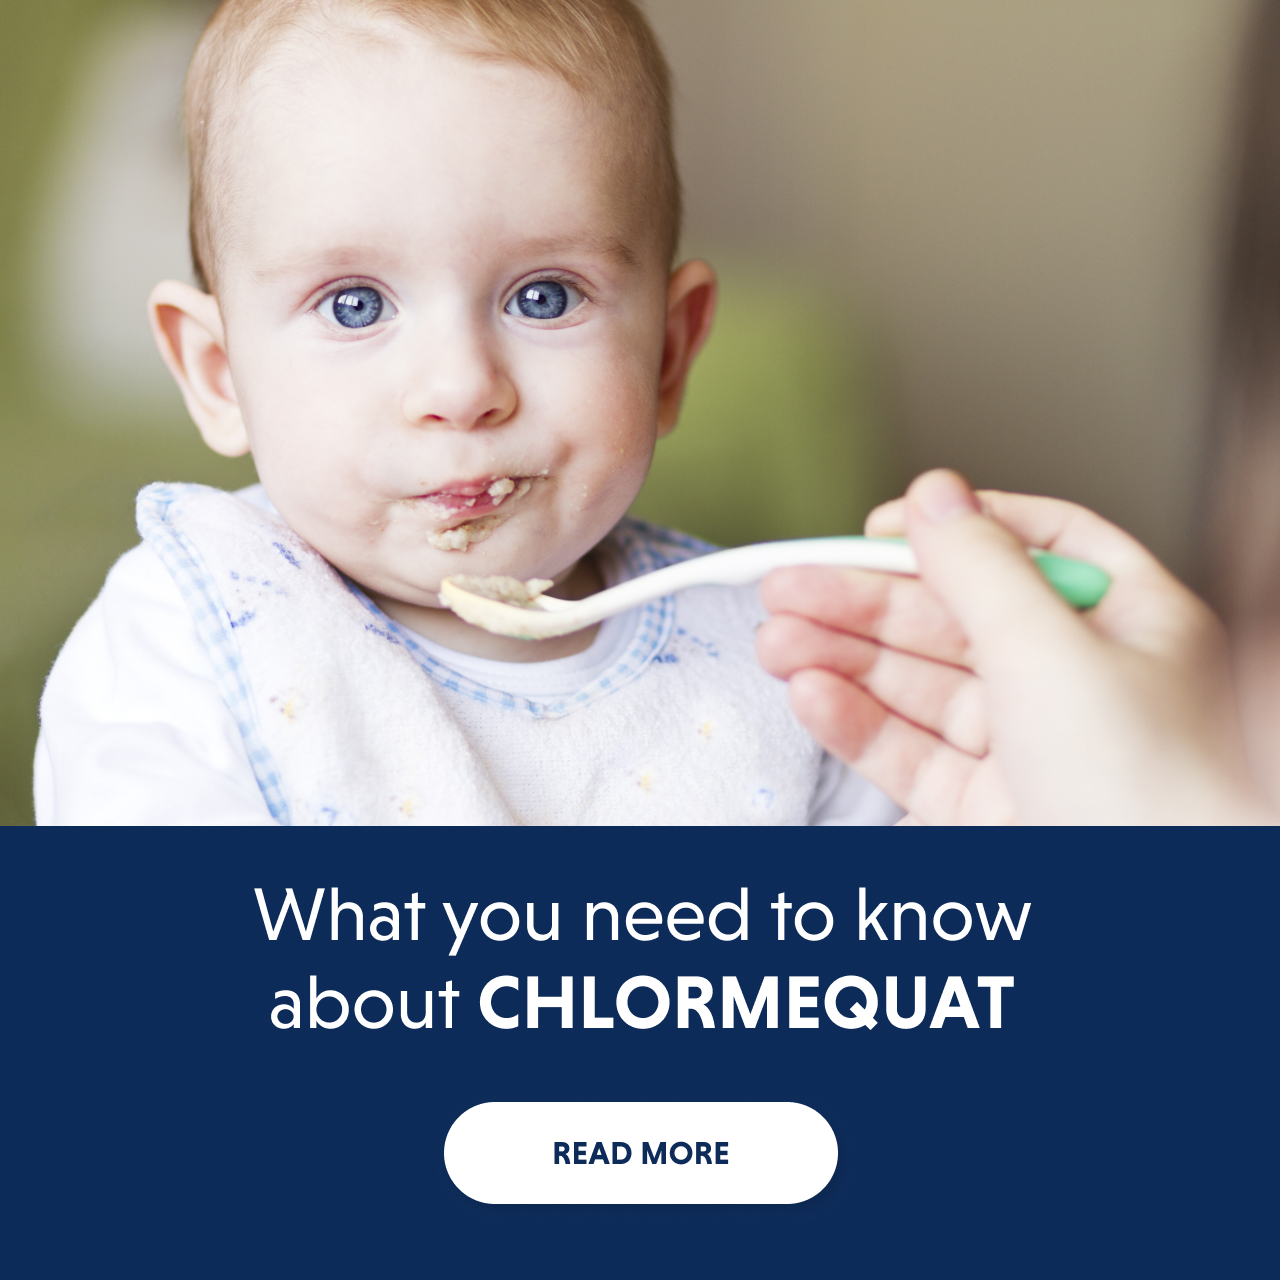 What you need to know about chlormequat - READ MORE